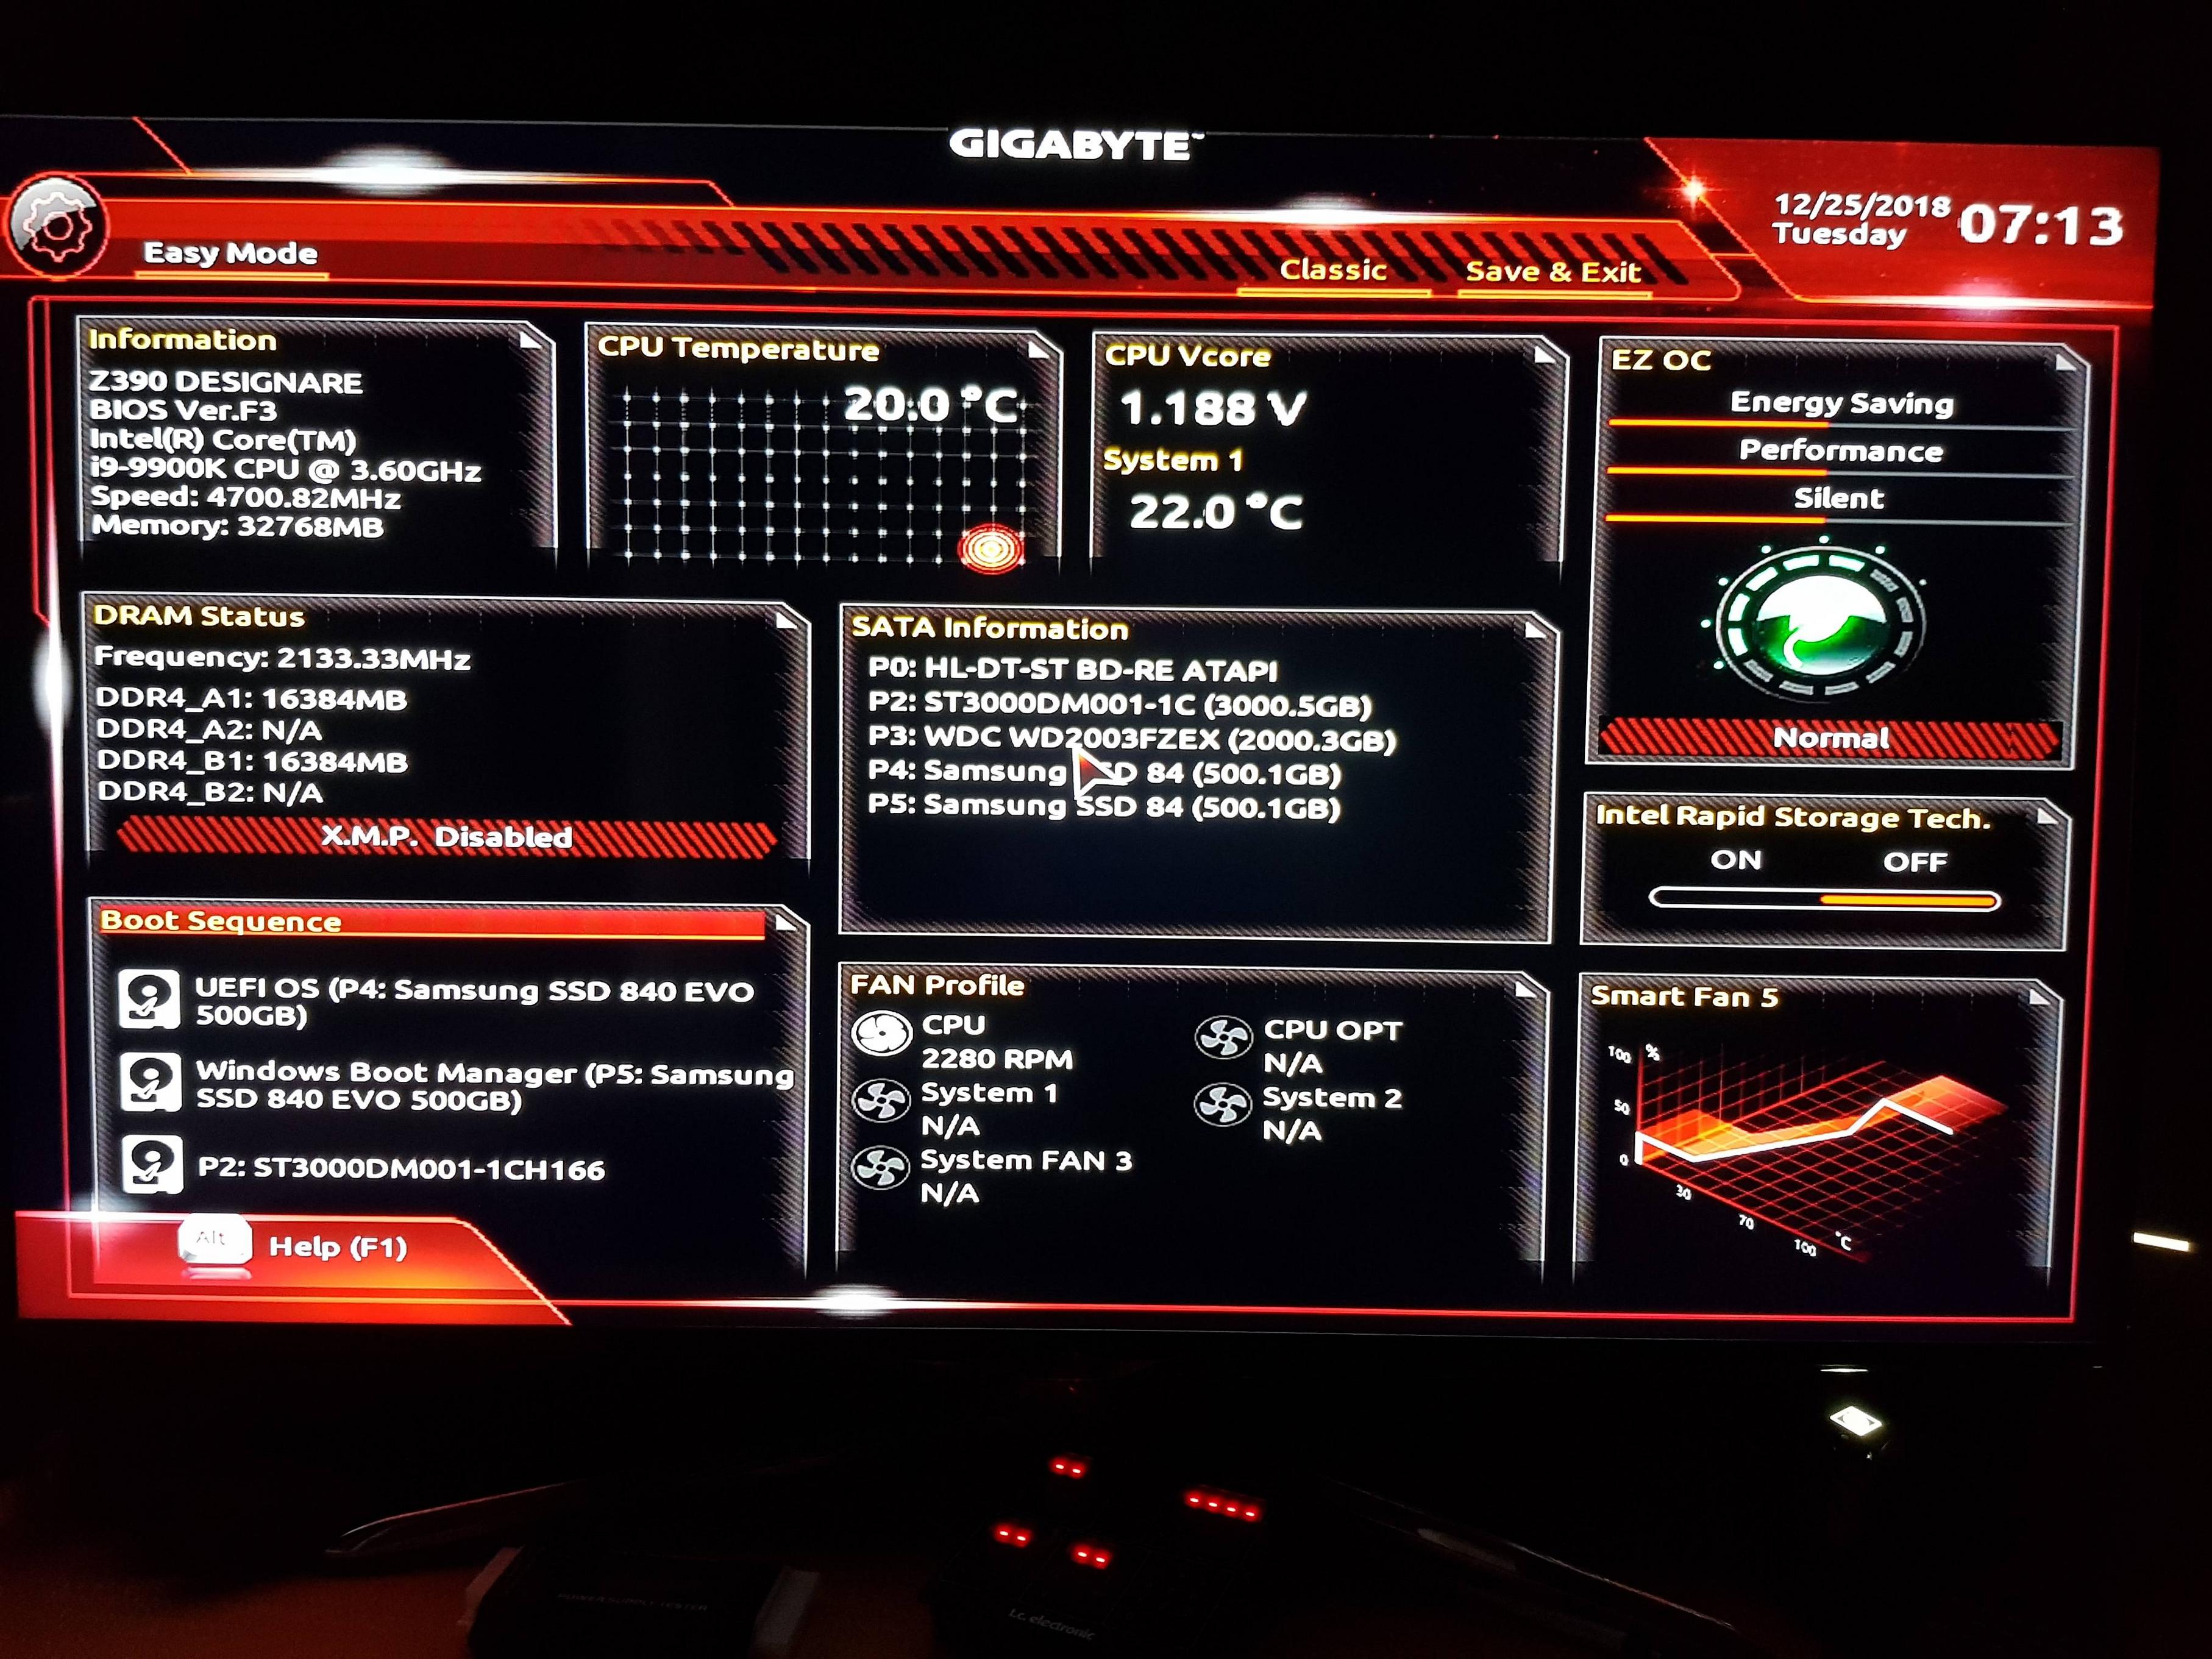 During restarts, BIOS will be loading.